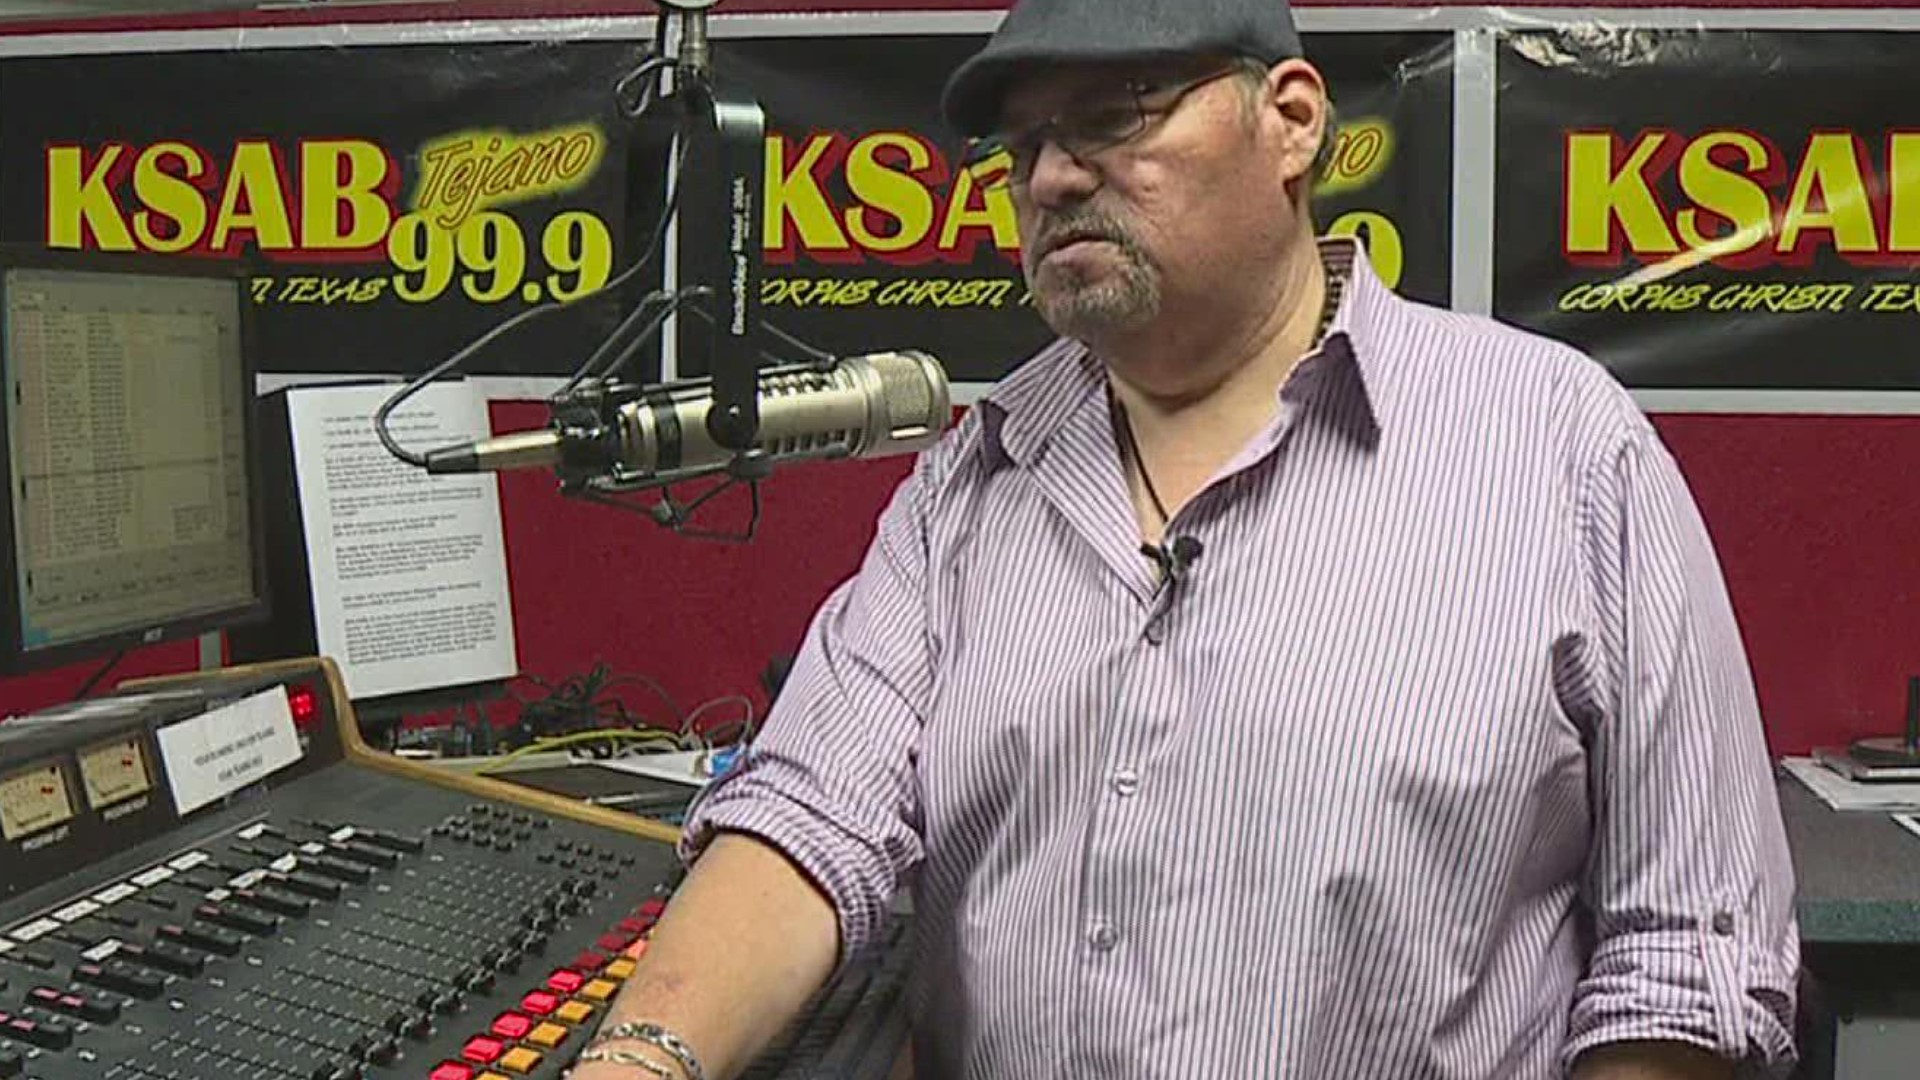 Dan Pena, long time Program Director for Corpus Christi Tejano radio station, KSAB, passed away this morning in an Alice Hospital after a brief illness.